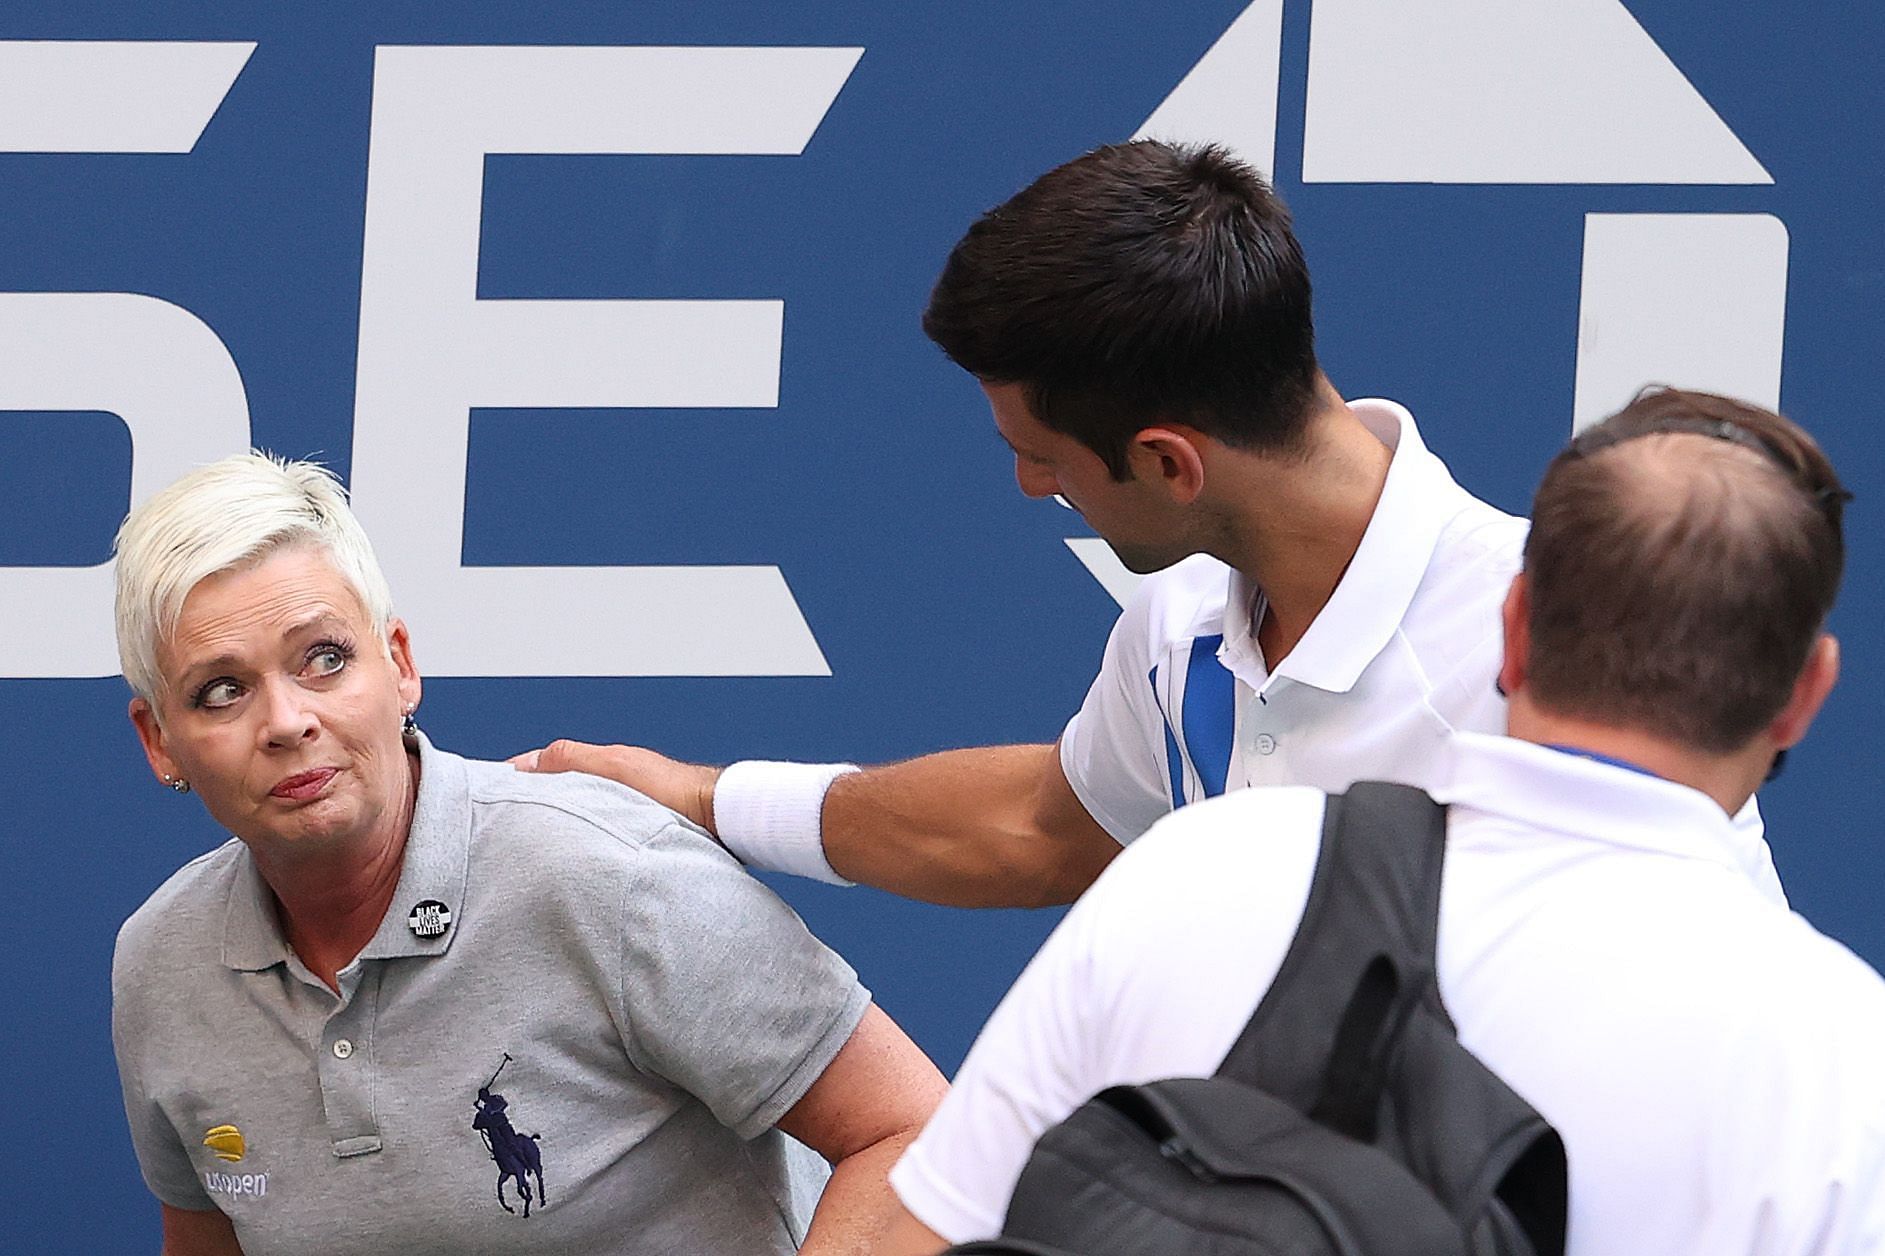 Novak Djokovic and a linesperson at the 2020 US Open.